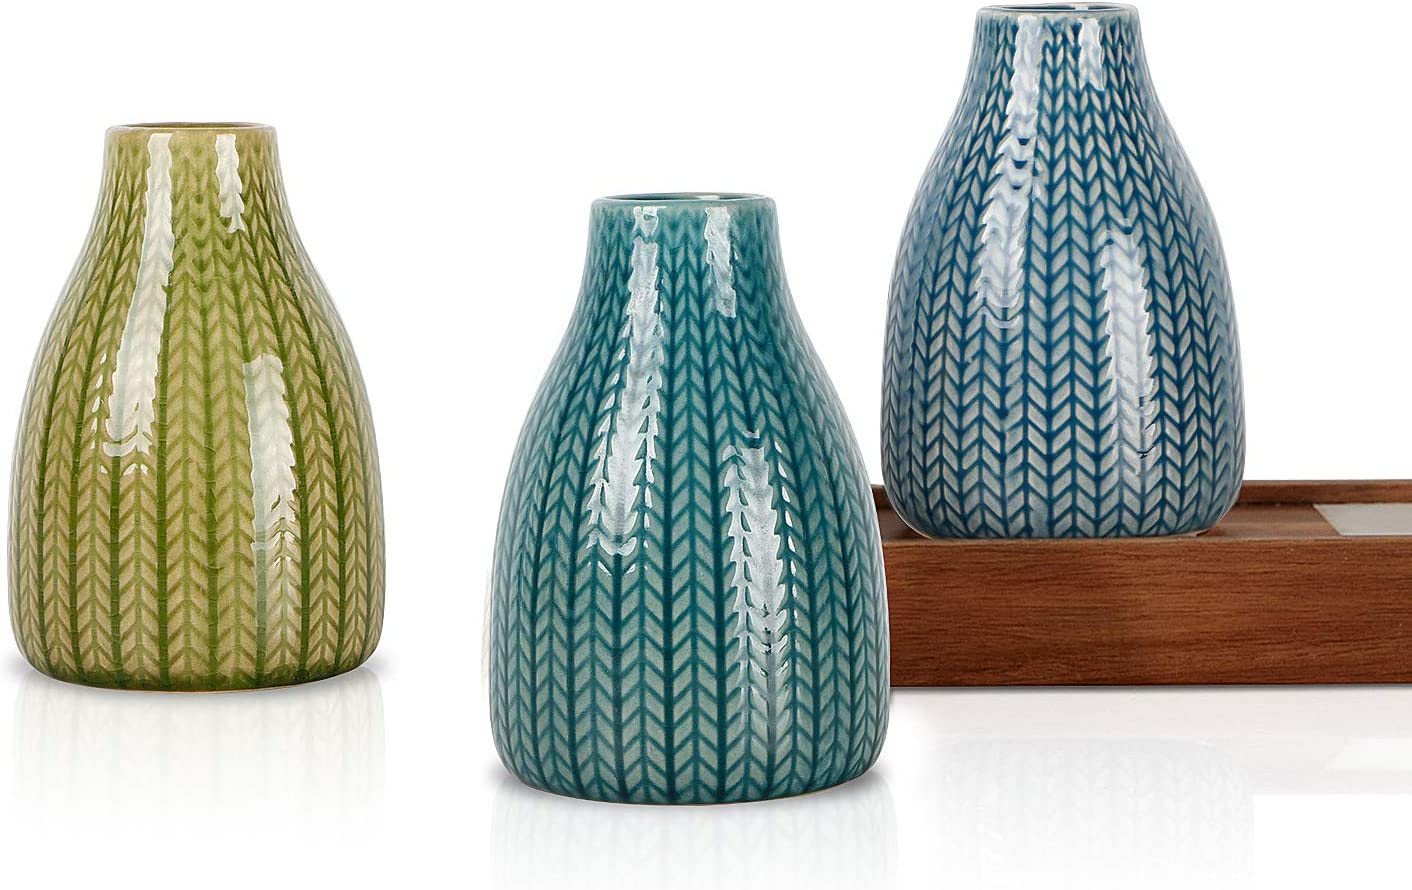 New Luxury Vase Set of 3, Textured Braided Wheat Pattern Crackle Glaze Porcelain Vase - Home Decor Gifts and More